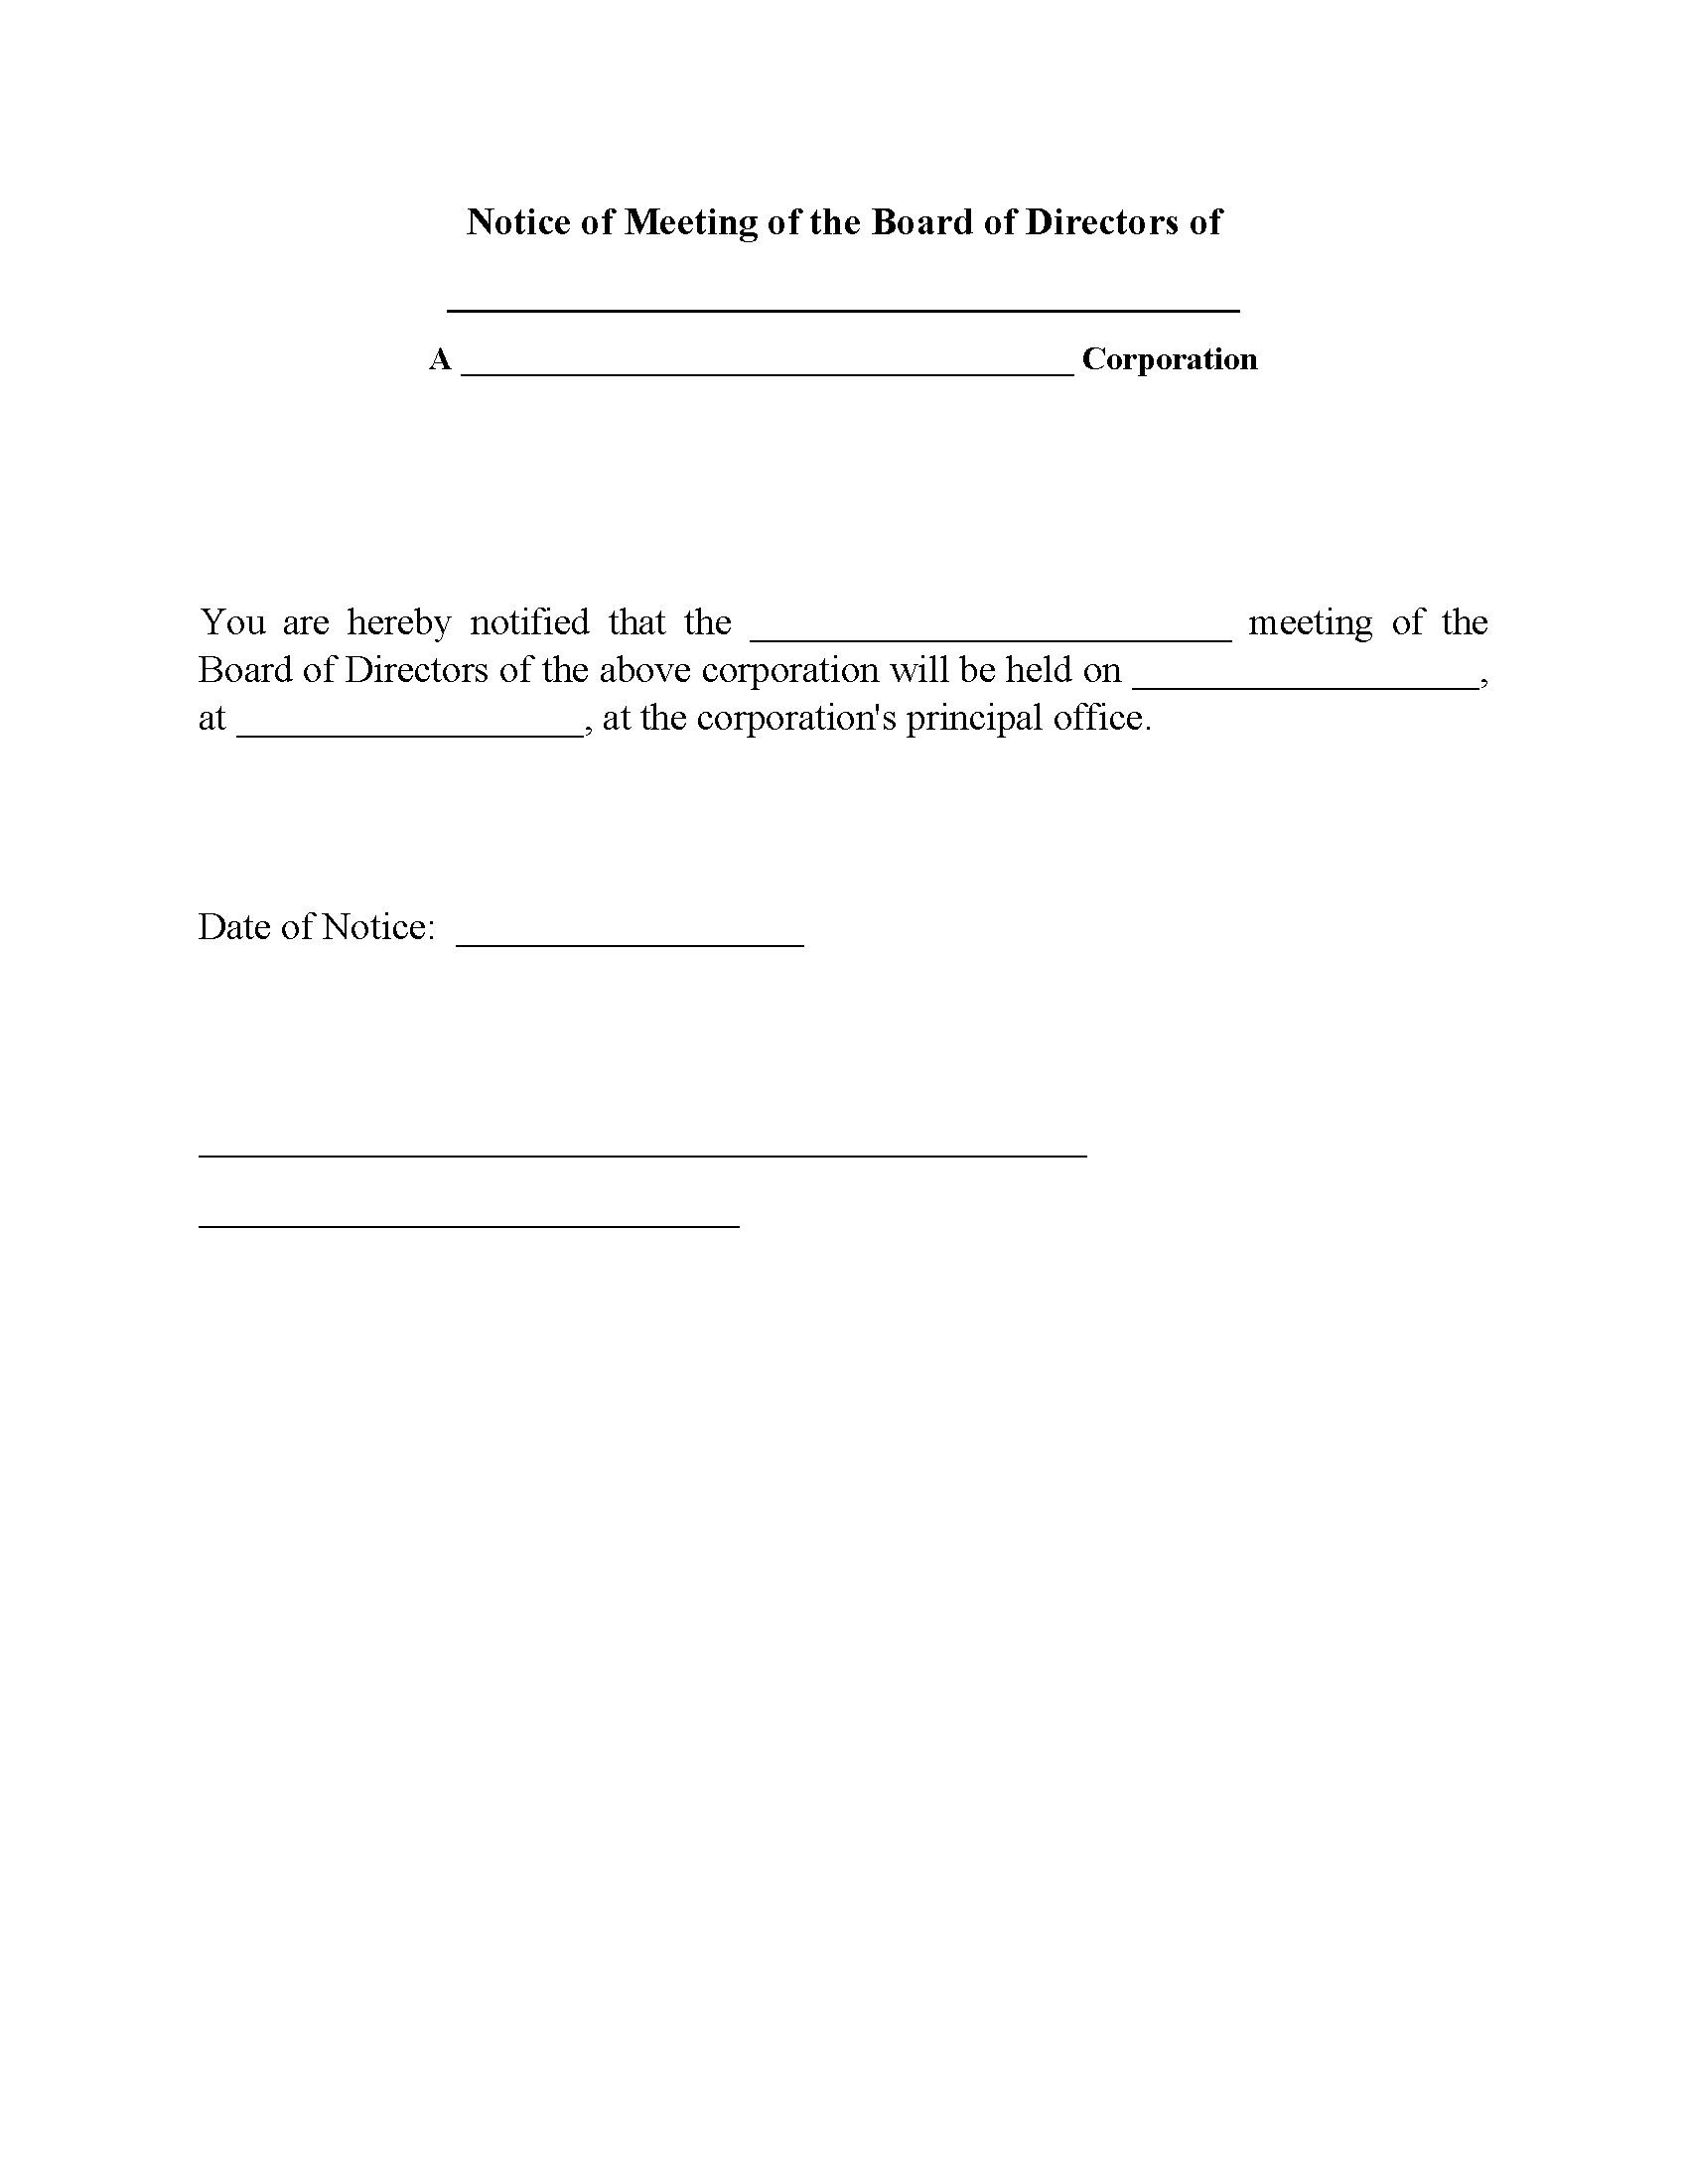 notice-of-meeting-of-board-of-directors-fillable-pdf-free-printable